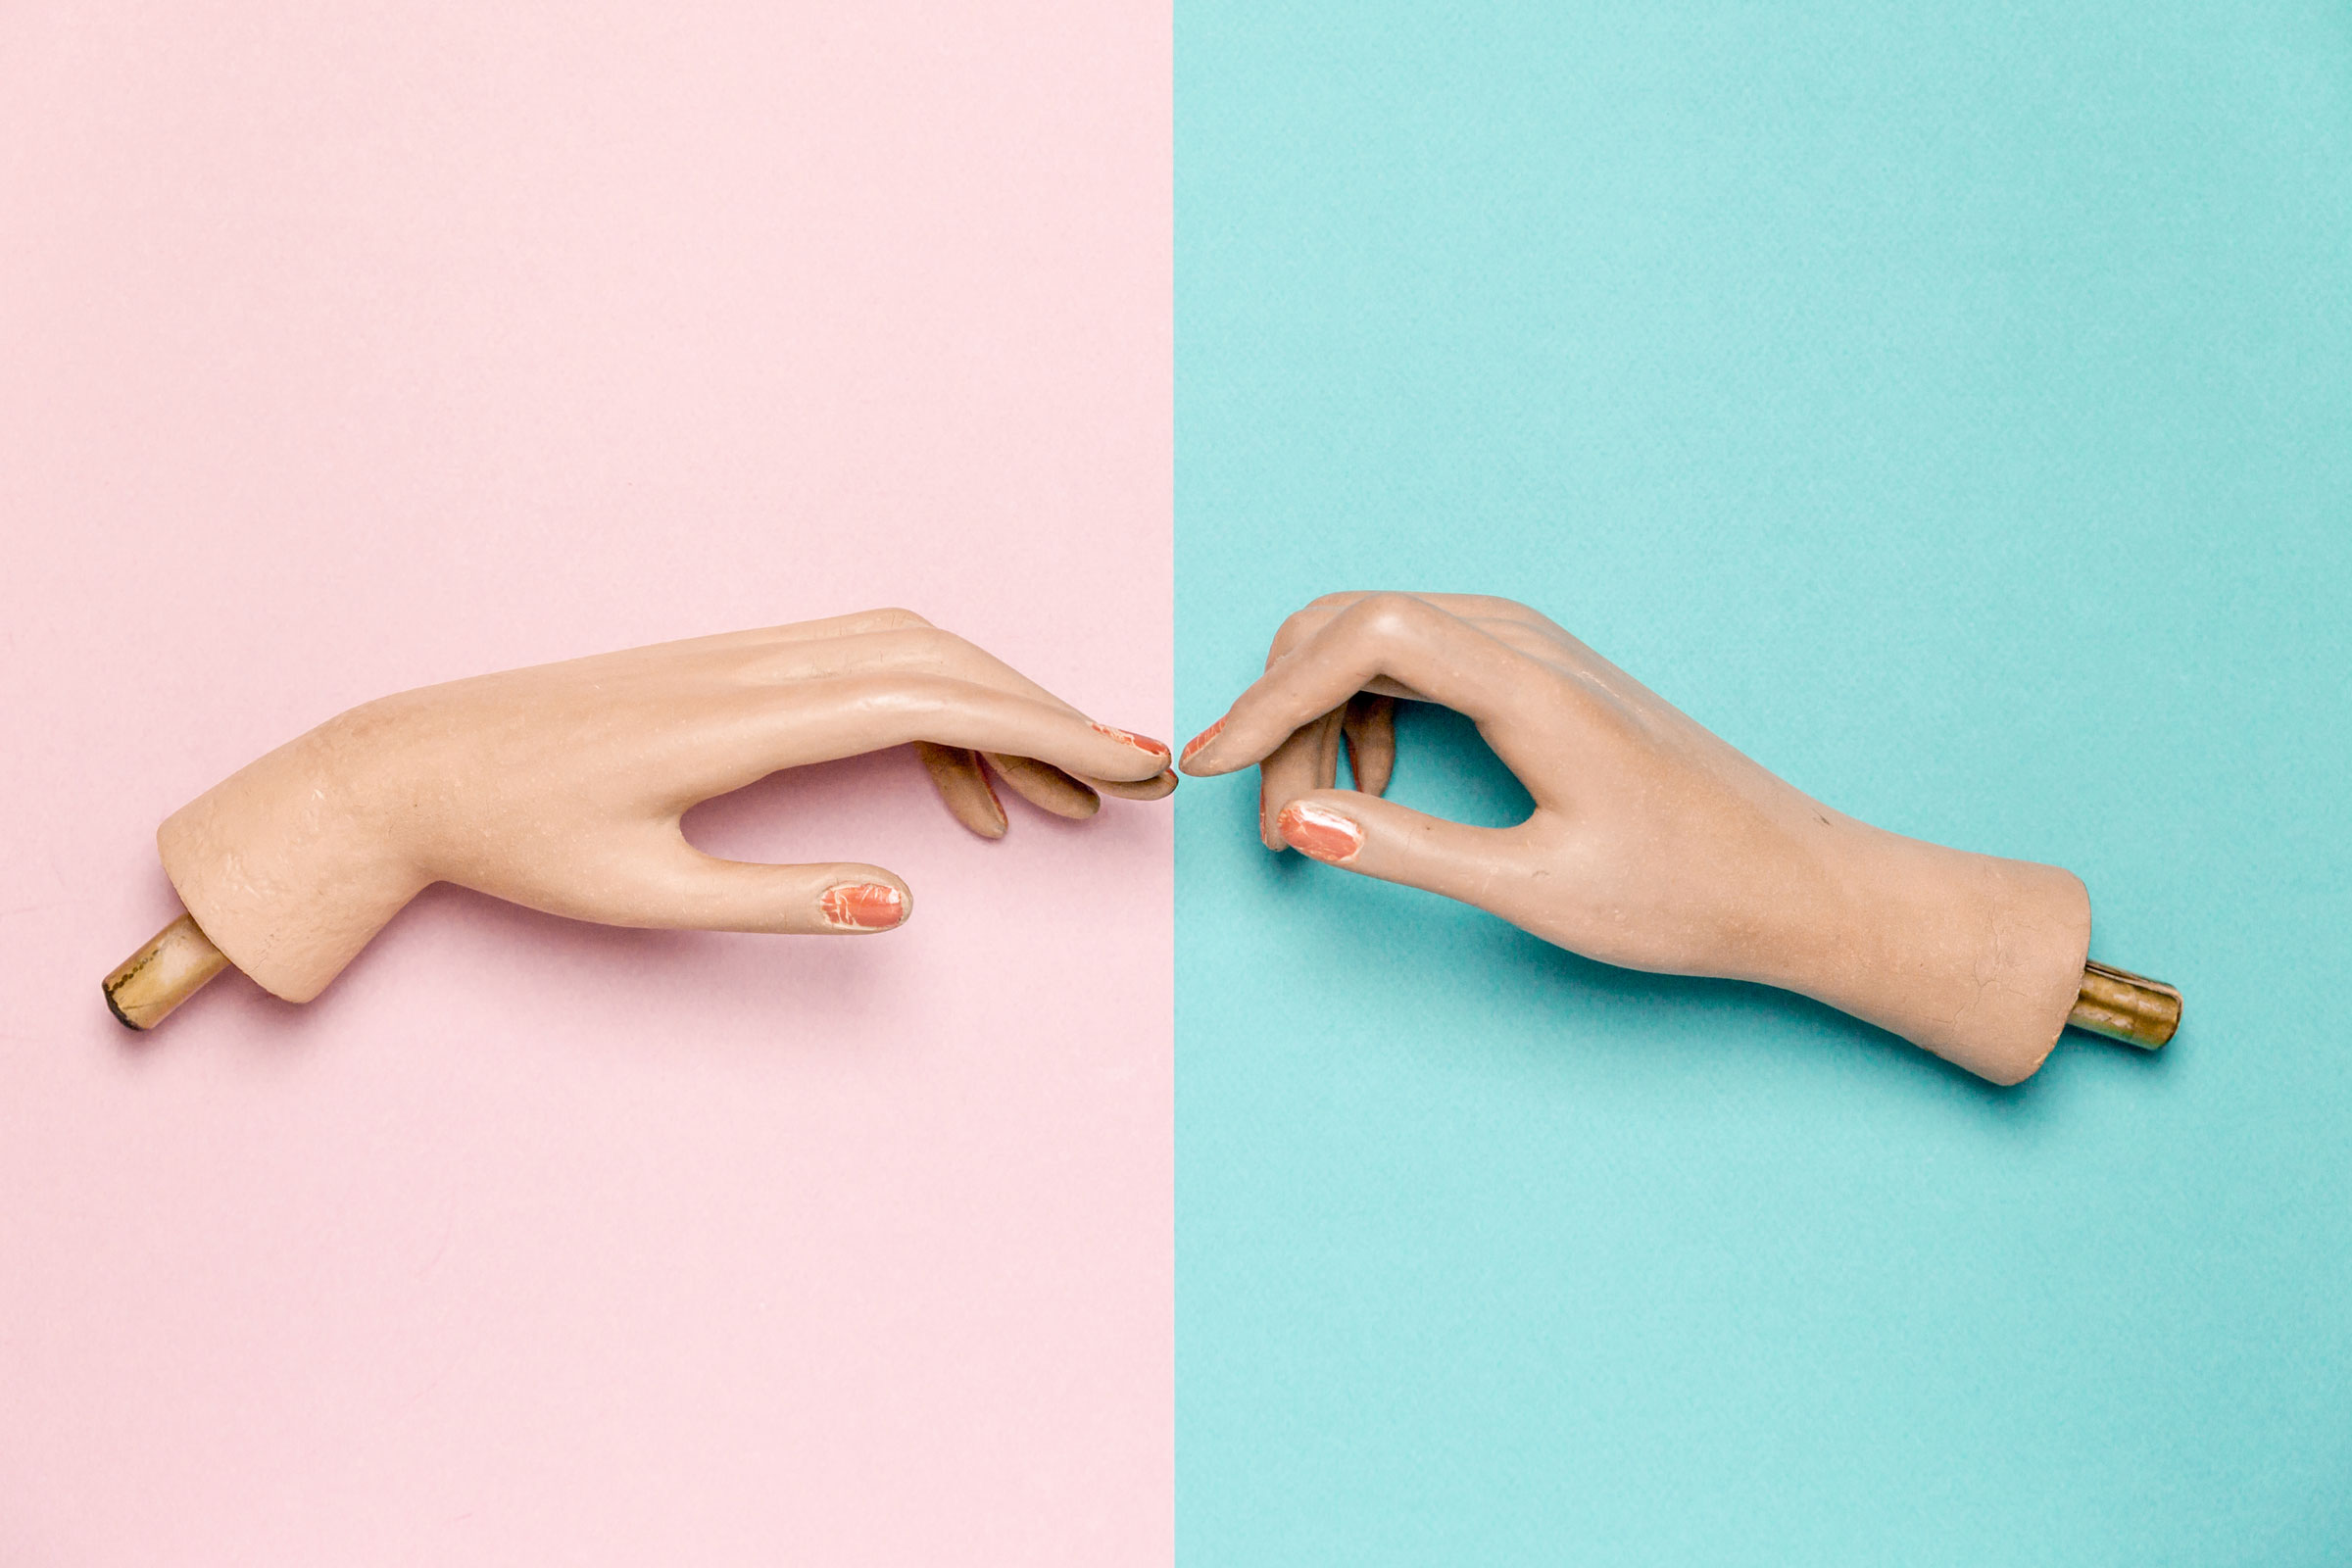 Two plastic hands trying to connect together, blue and pink background